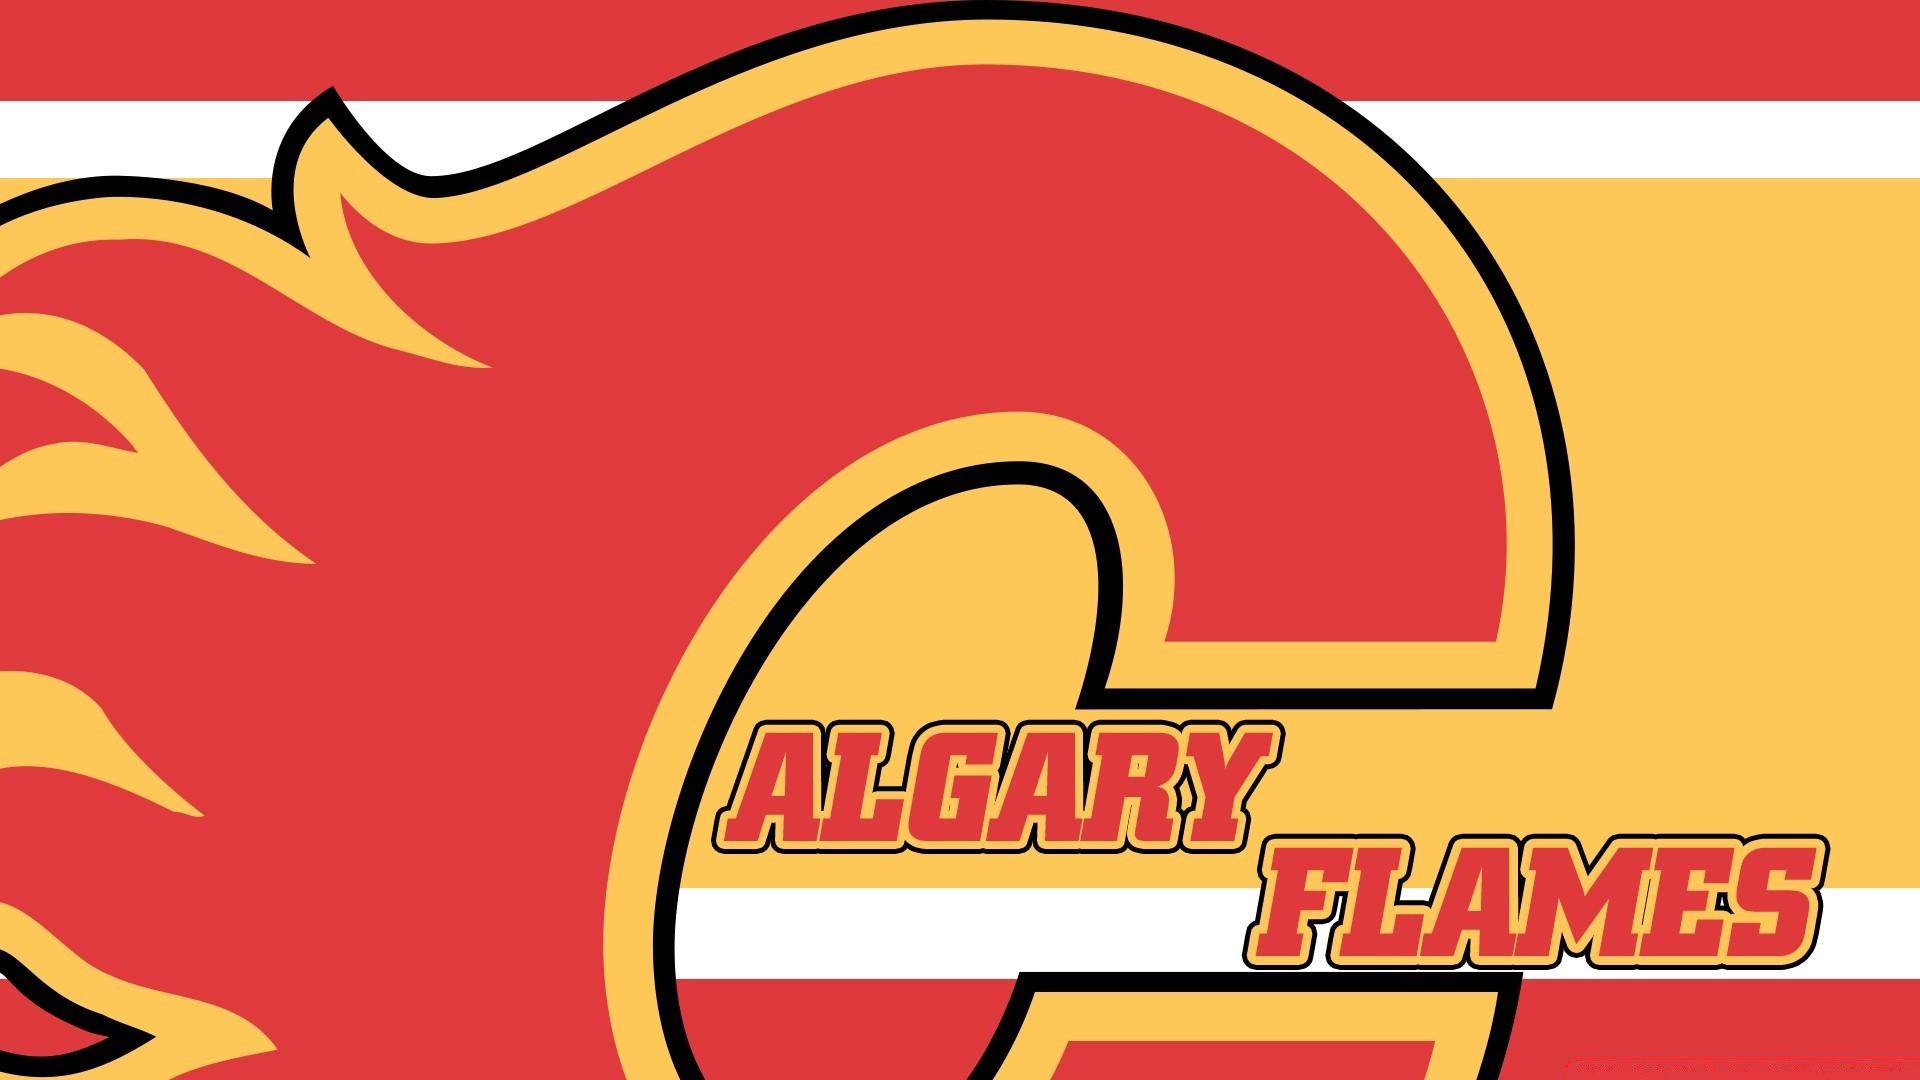 Calgary Flames. iPhone wallpaper for free